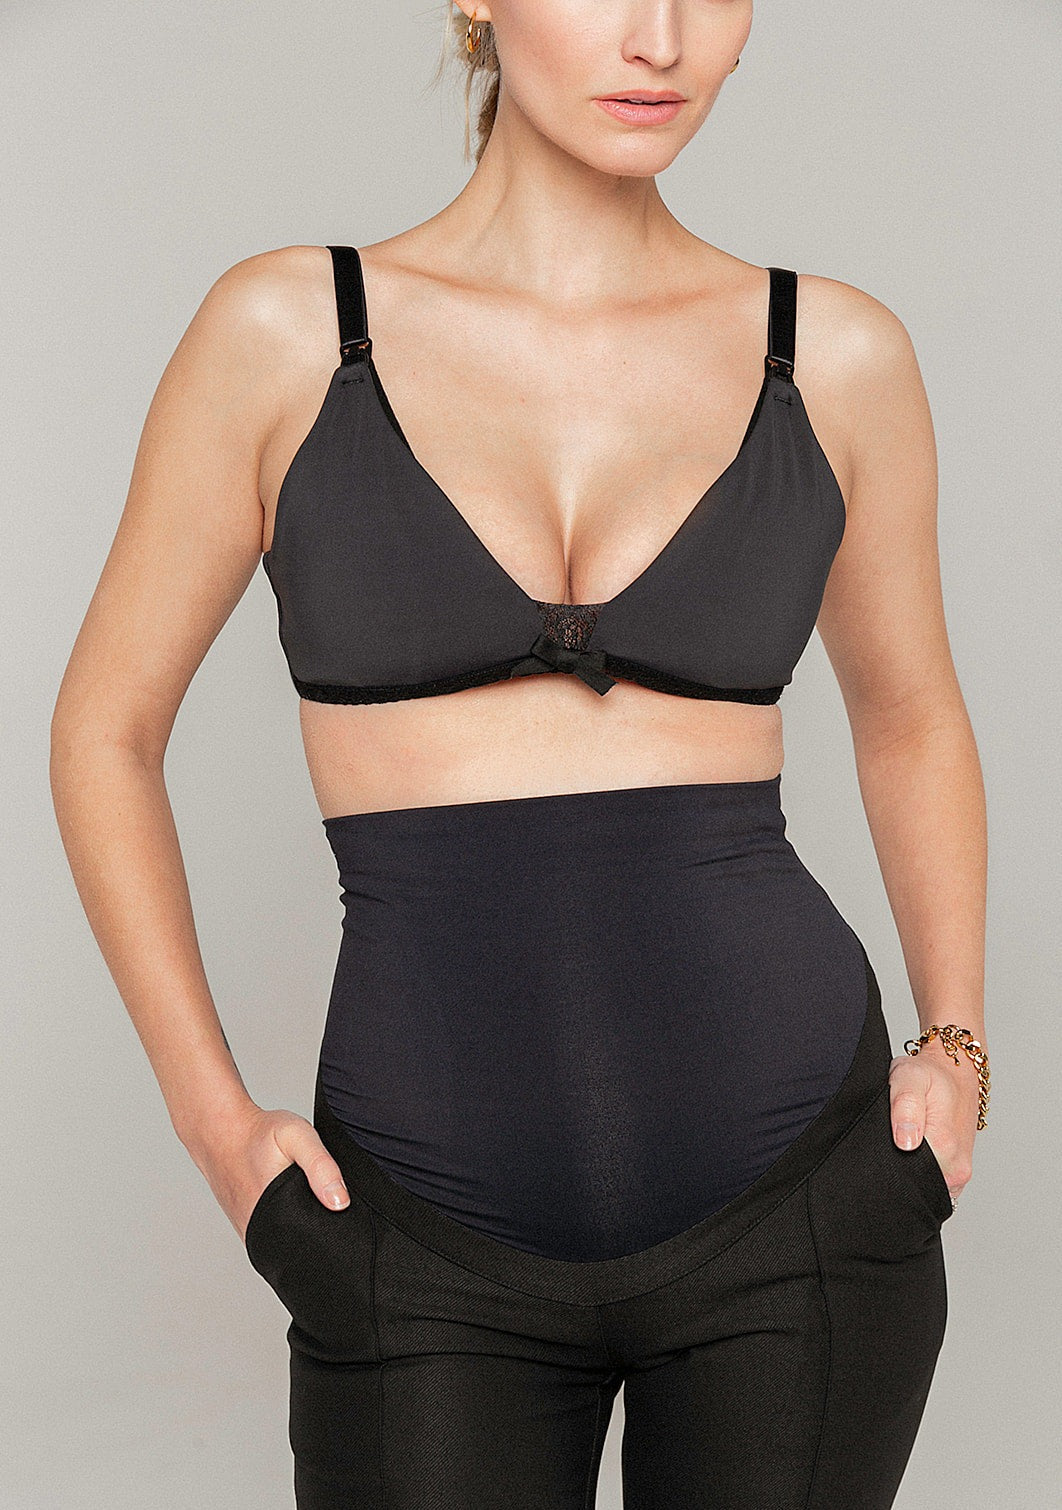 Black wireless maternity and nursing bra with lace details. Made from recycled Polyester and Spandex. 